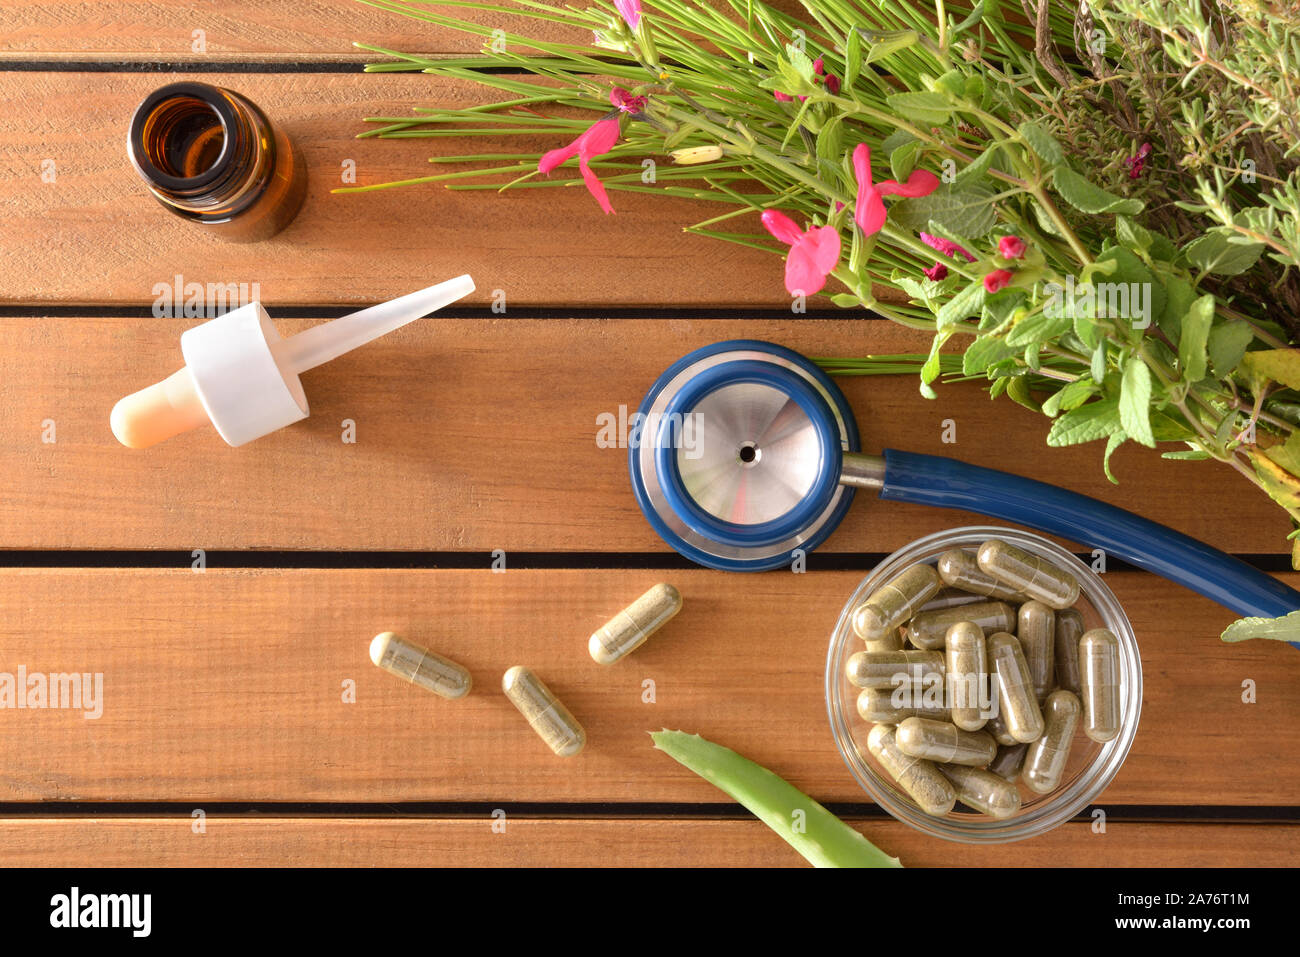 Natural herbal medicine capsules on wood table with stethoscope plants and dropper bottle with medicinal liquid. Alternative natural medicine concept. Stock Photo